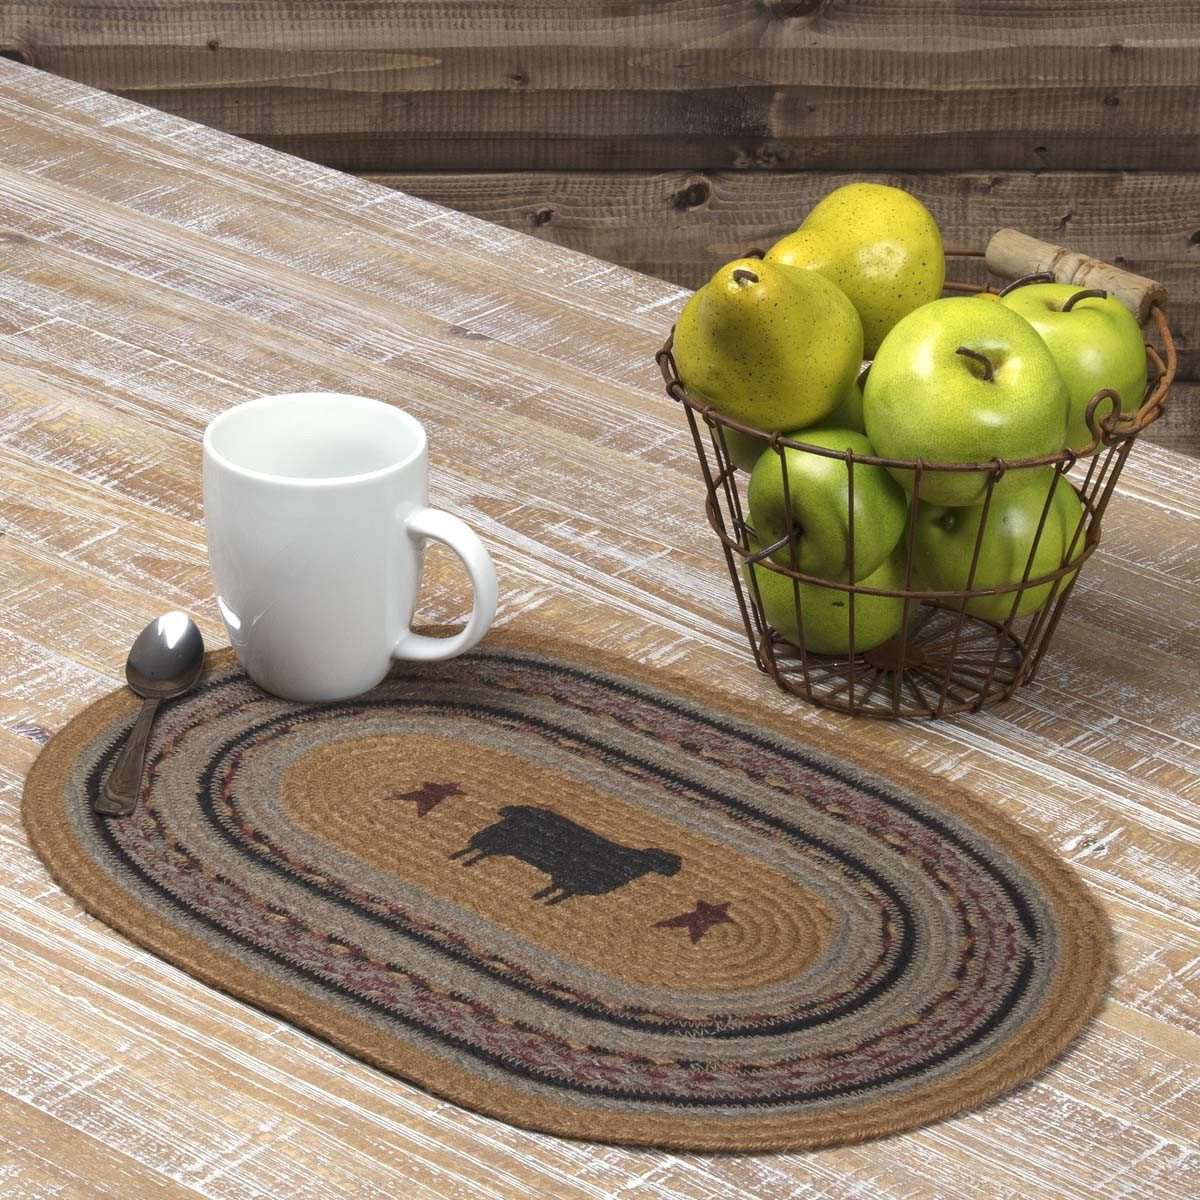 Heritage Farms Sheep Jute Braided Placemat Set of 6 VHC Brands - The Fox Decor